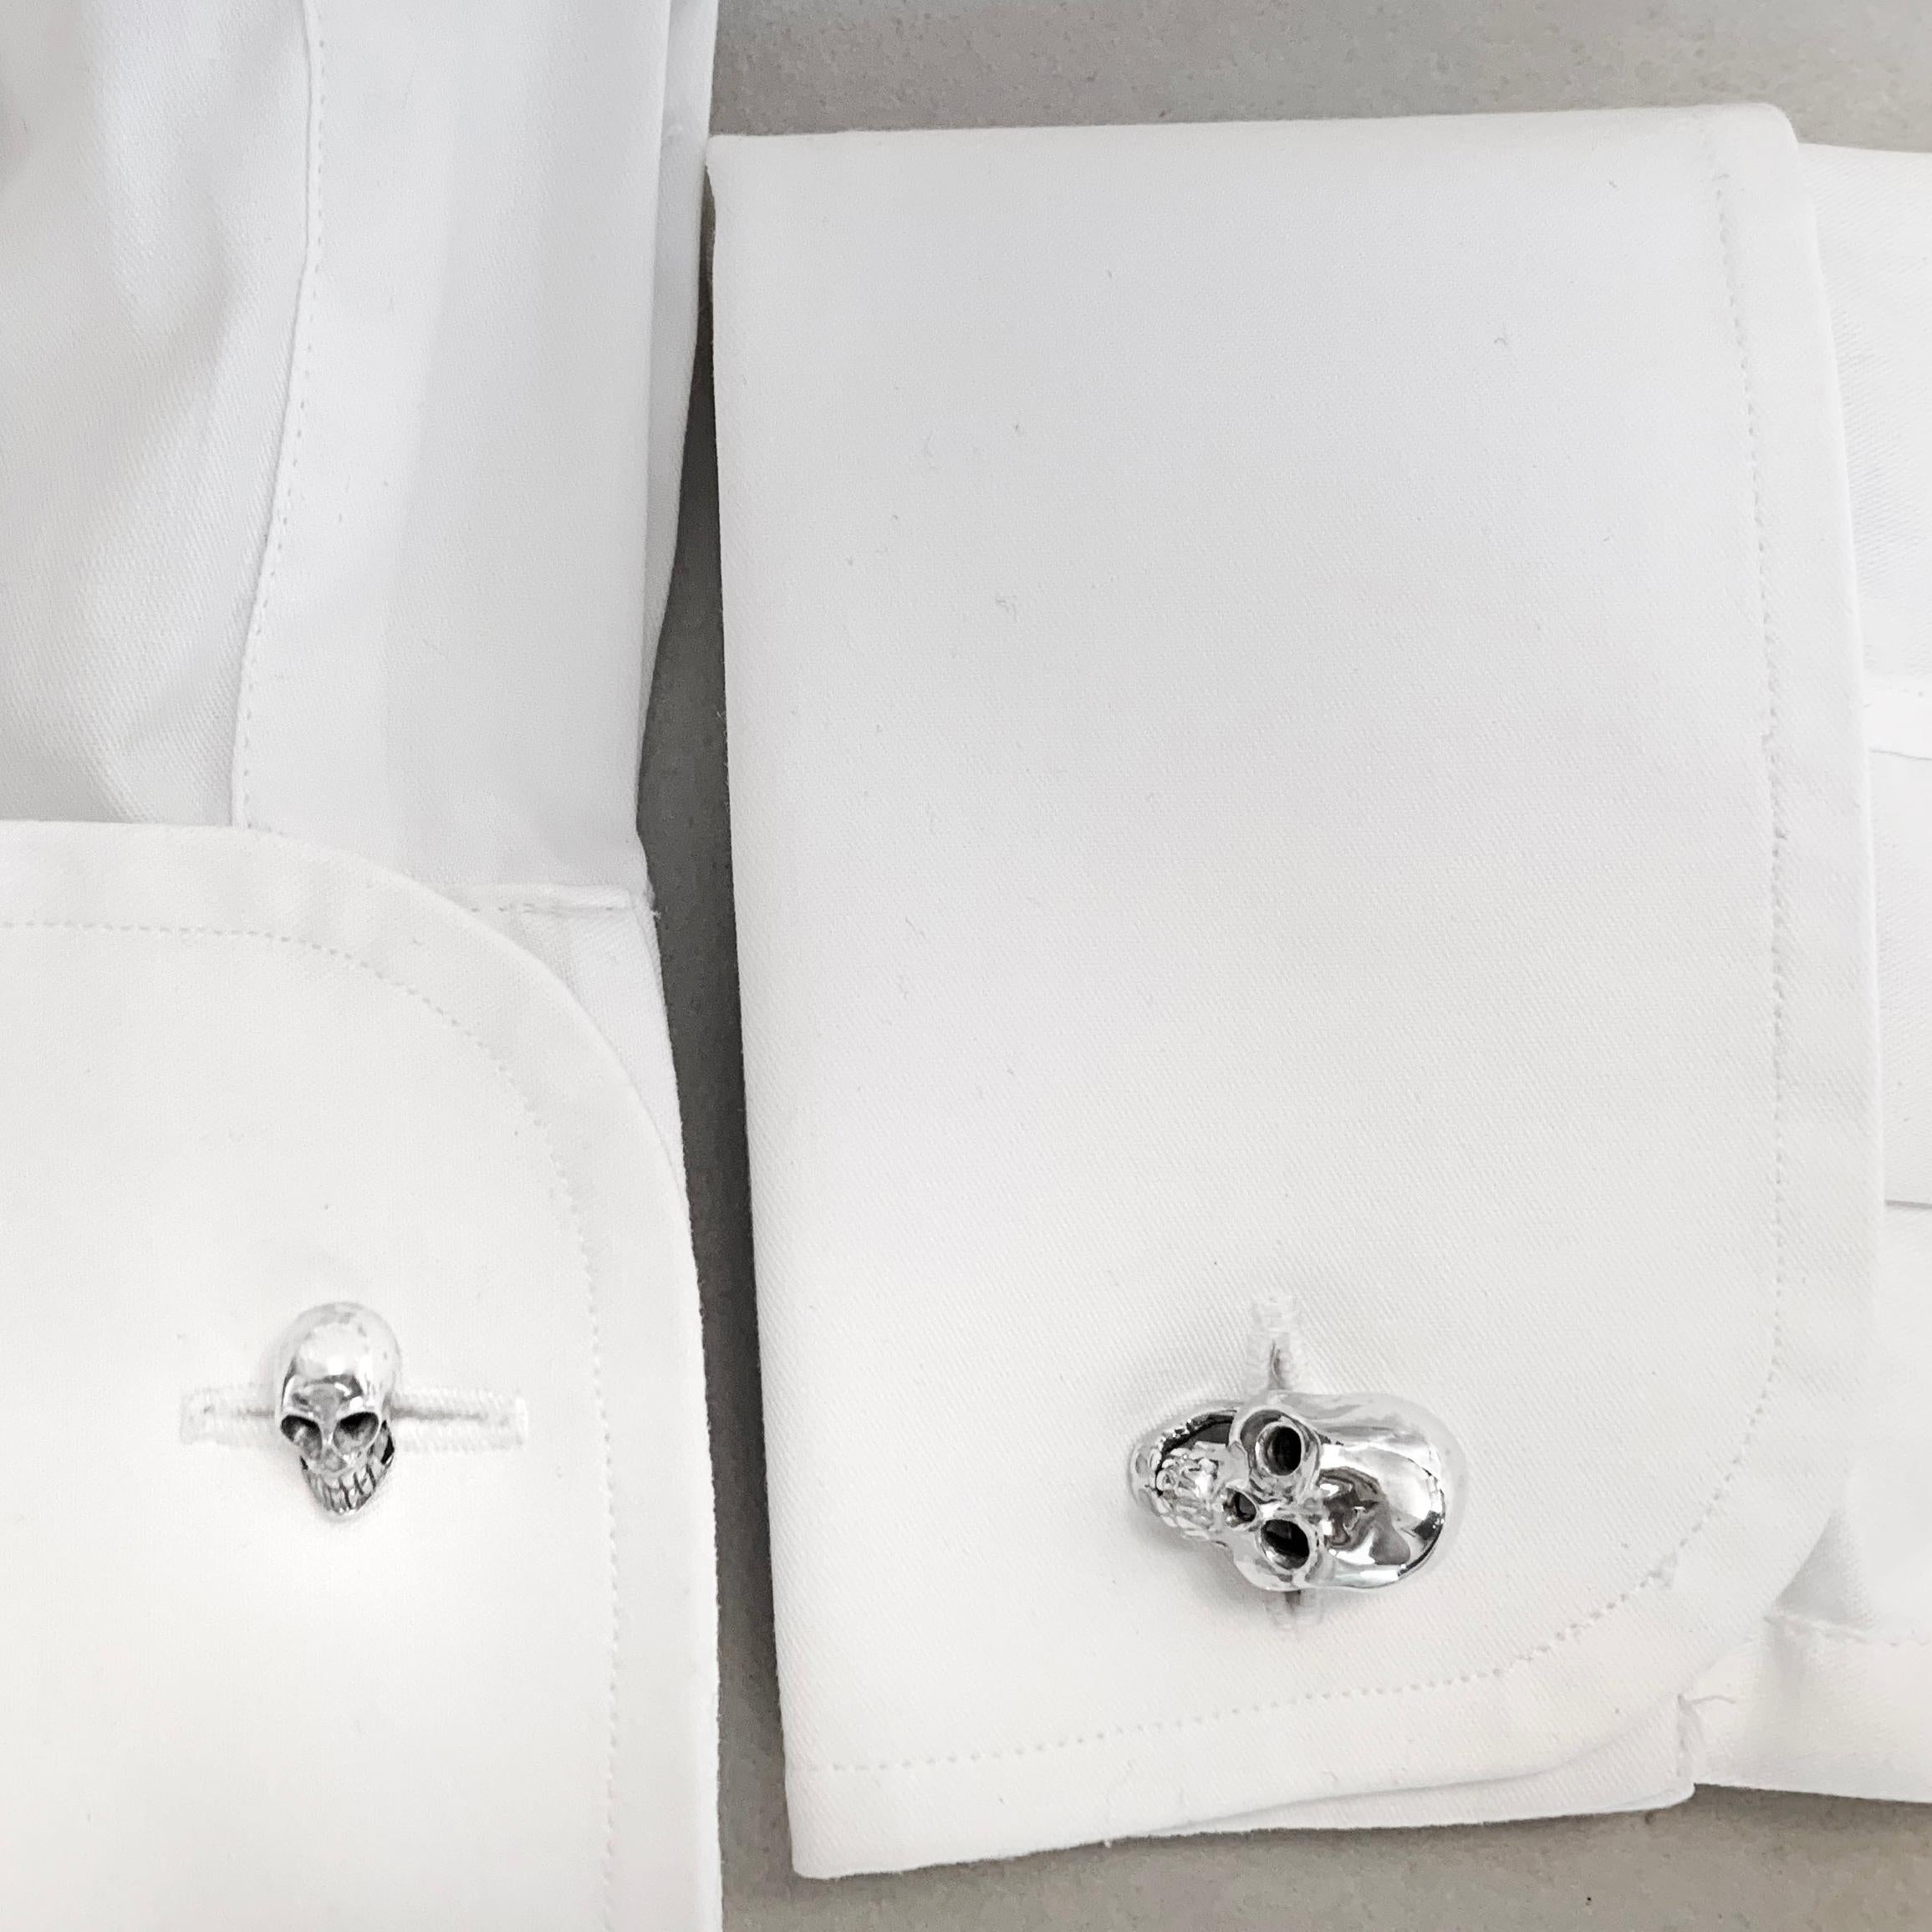 This pair of cufflinks is entirely made in sterling silver 925, featuring two skulls bigger and as a post two skulls smaller.

All AVGVSTA jewelry is new and has never been previously owned or worn.  
Each item will arrive beautifully gift wrapped